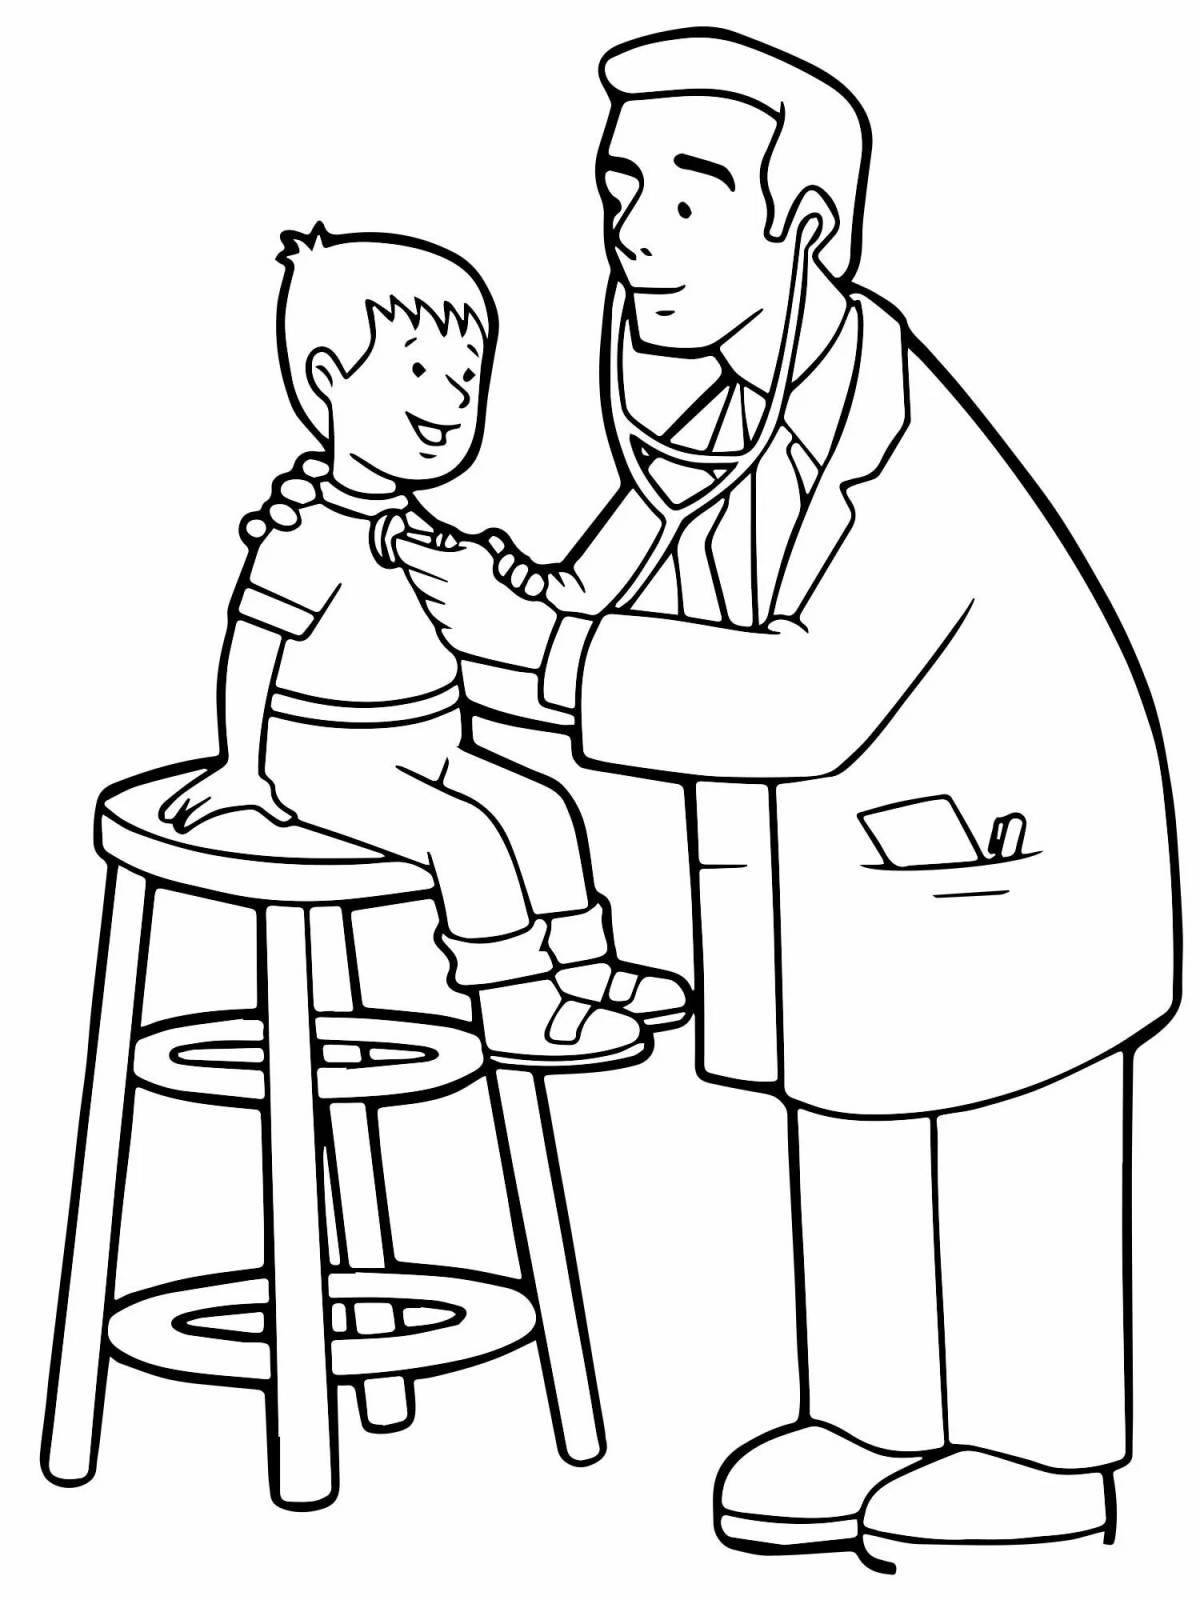 Charming surgeon coloring page for kids